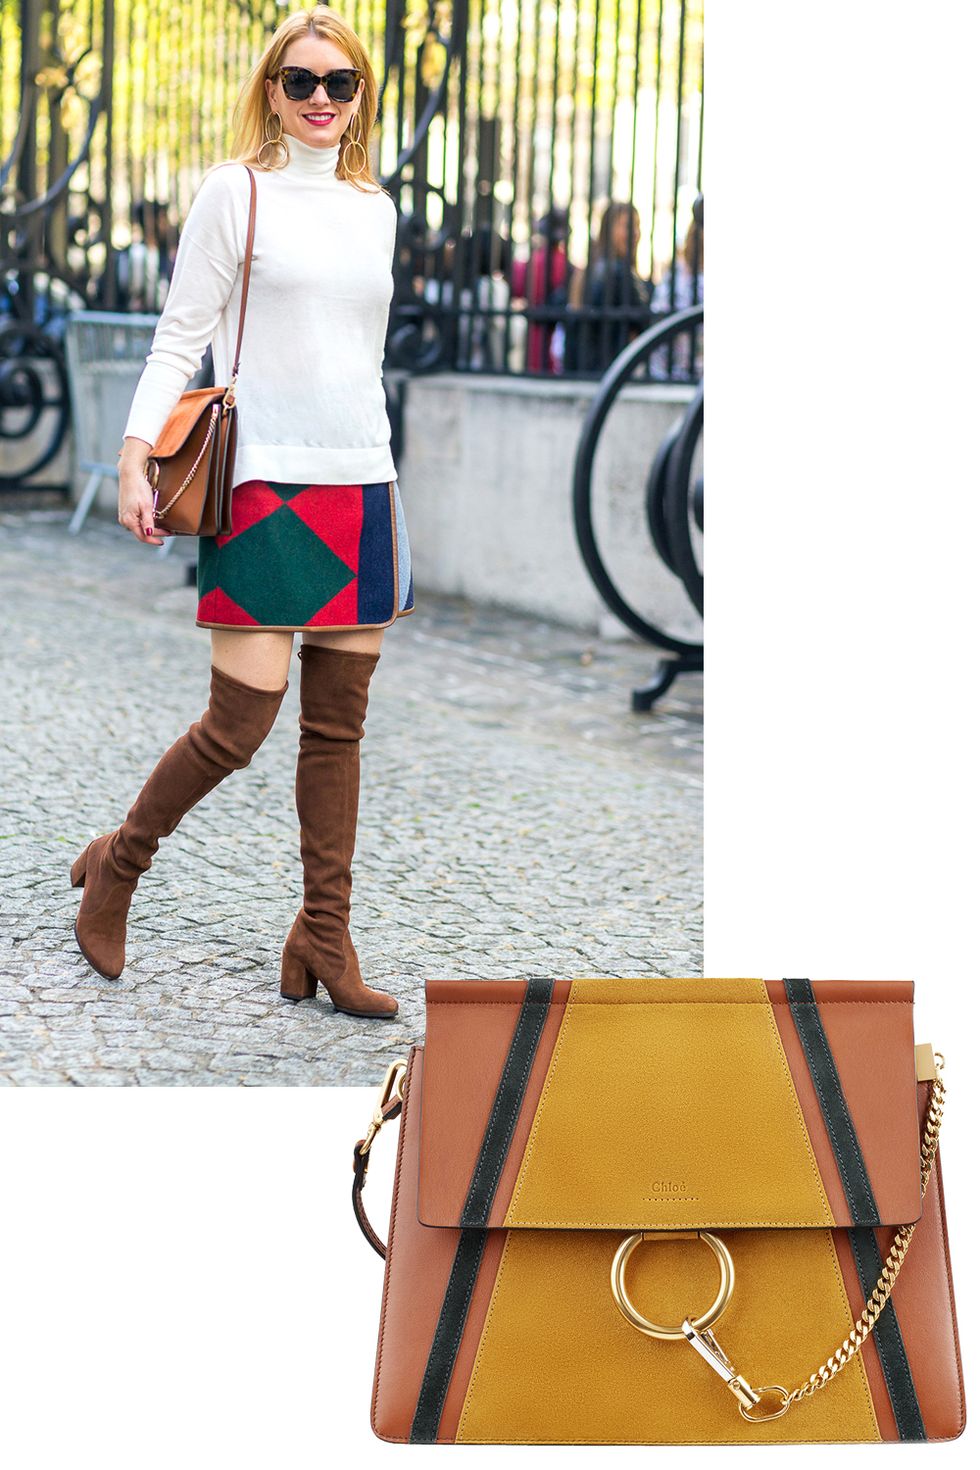 <p>BAZAAR.com editor, Joyann King rocked a must-have&nbsp;Chloé<span class="redactor-invisible-space"> handbag in some of fall's favorite shades.&nbsp;</span></p><p><span class="redactor-invisible-space"><em data-redactor-tag="em" data-verified="redactor">Chloé<span class="redactor-invisible-space">&nbsp;</span>bag, $2,090, <strong data-redactor-tag="strong" data-verified="redactor"><a href="https://shop.harpersbazaar.com/c/chlo/faye-patchwork-of-smooth-and-suede-calfskin-9780.html" target="_blank">shopBAZAAR.com</a></strong>.&nbsp;</em></span></p>